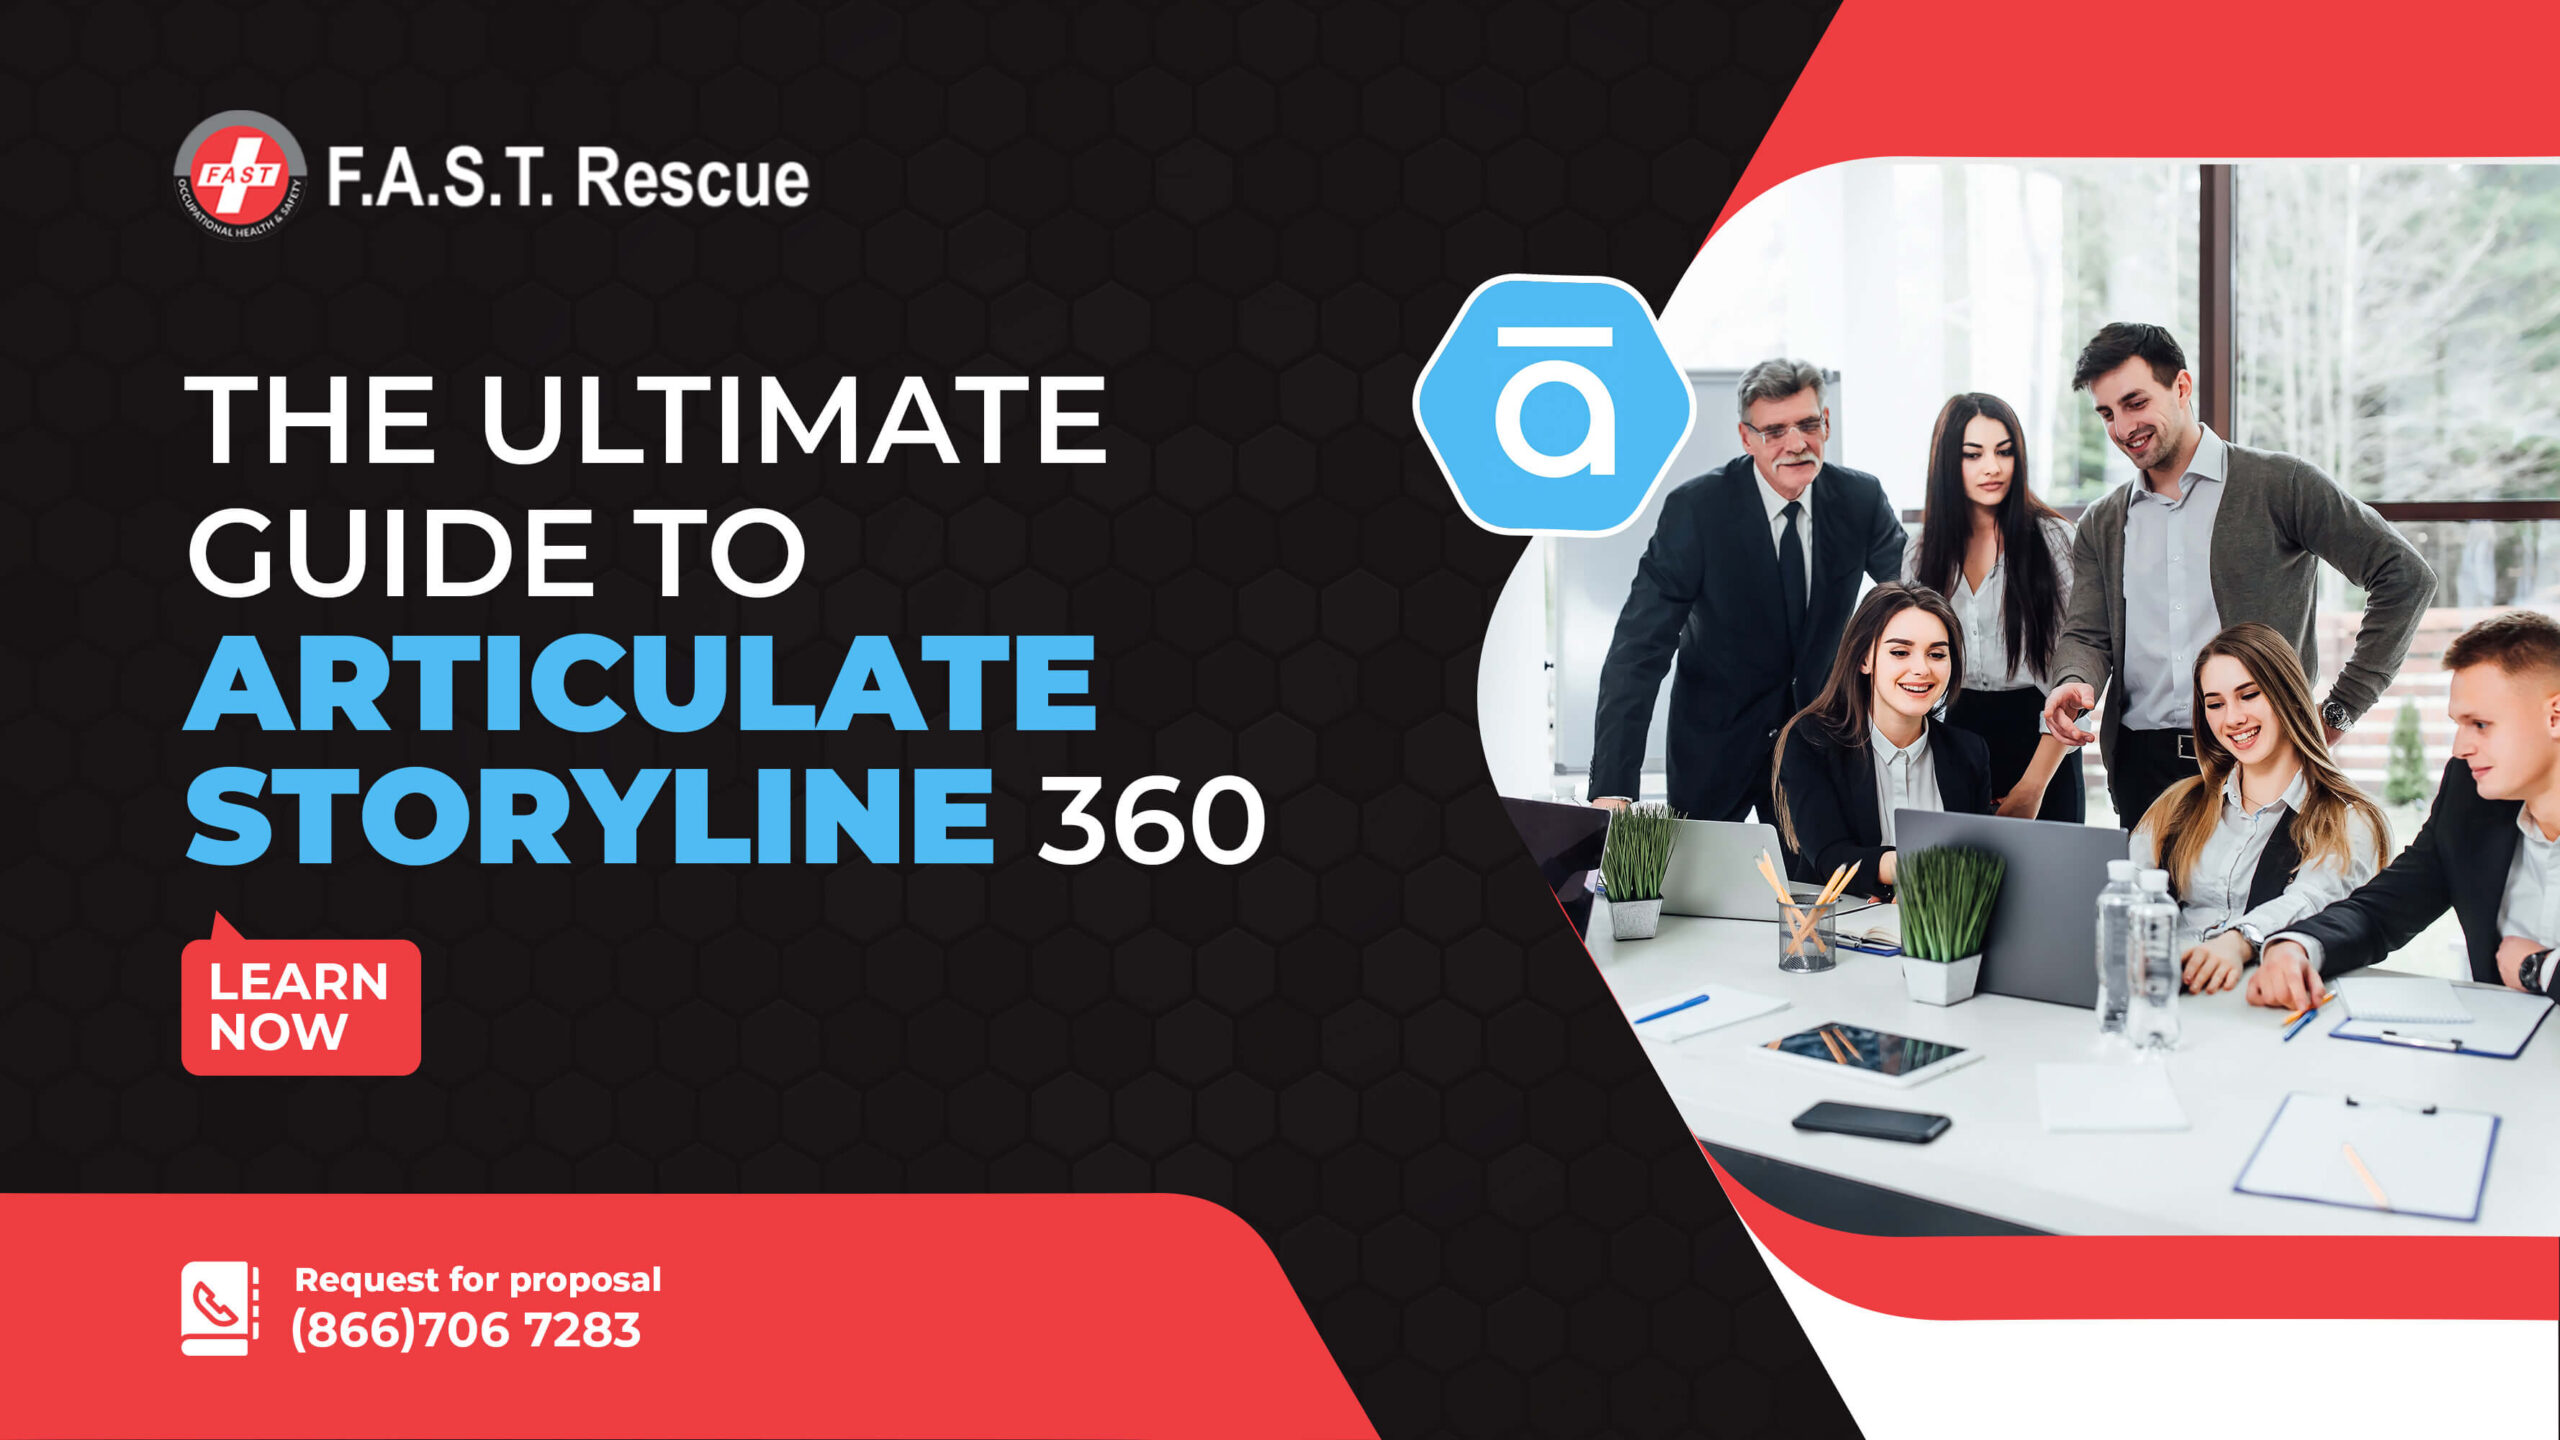 The Ultimate Guide to Articulate Storyline 360 for Building Highly Interactive e-Learning Modules